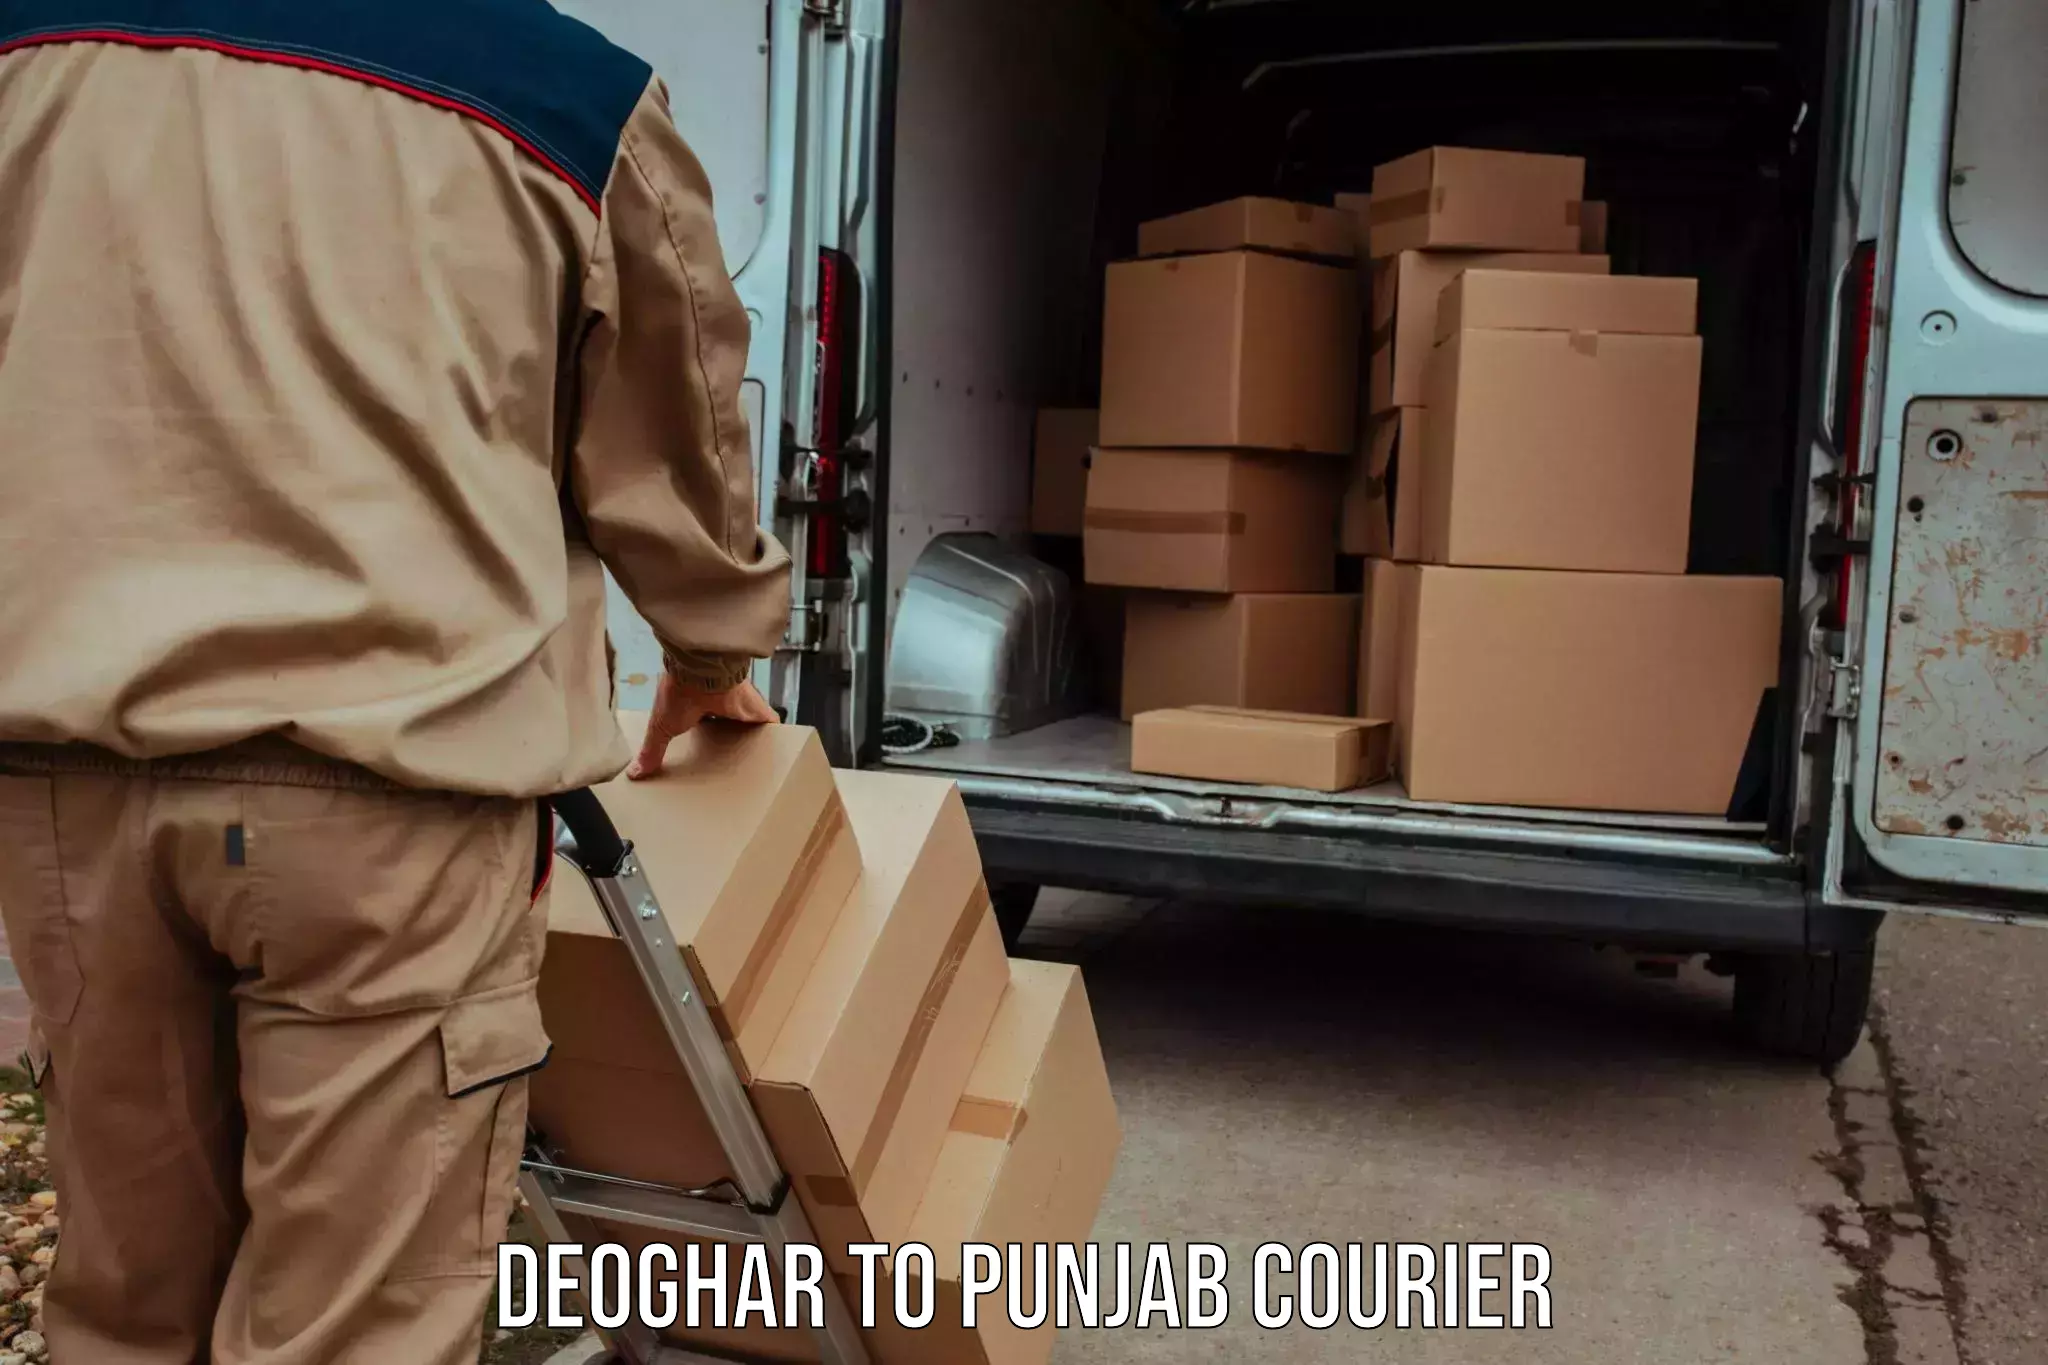 Full-service courier options Deoghar to Goindwal Sahib